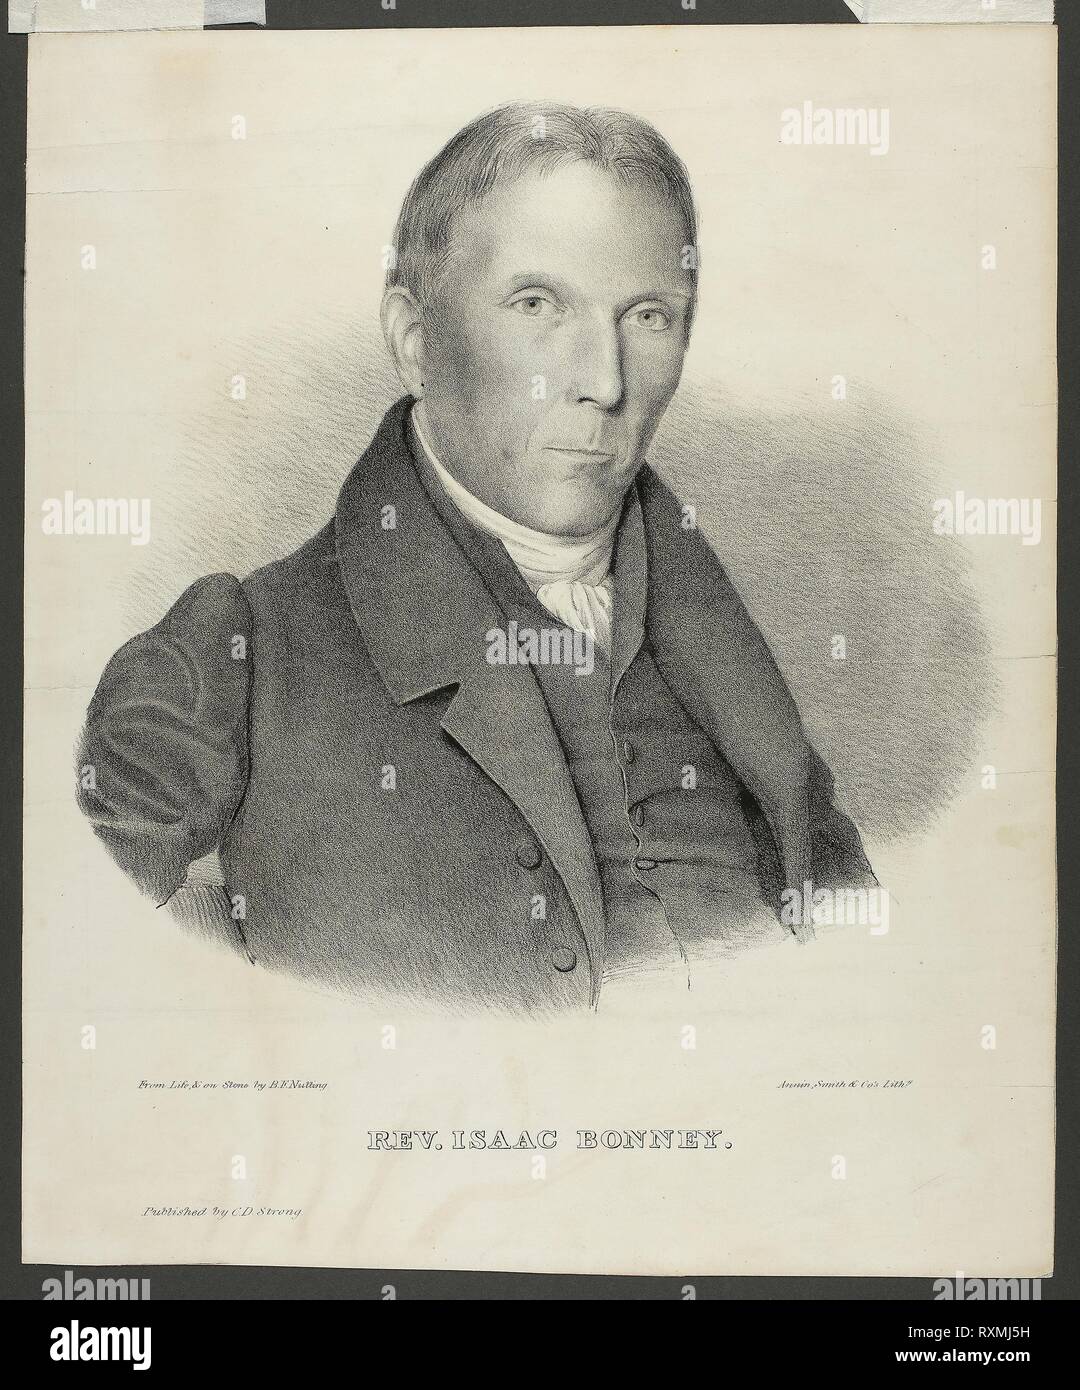 Reverend Isaac Bonney. Benjamin F. Nutting; American, 1826-1884. Date: 1825-1833. Dimensions: 308 x 255 mm. Lithograph on ivory wove paper, laid down. Origin: United States. Museum: The Chicago Art Institute. Stock Photo